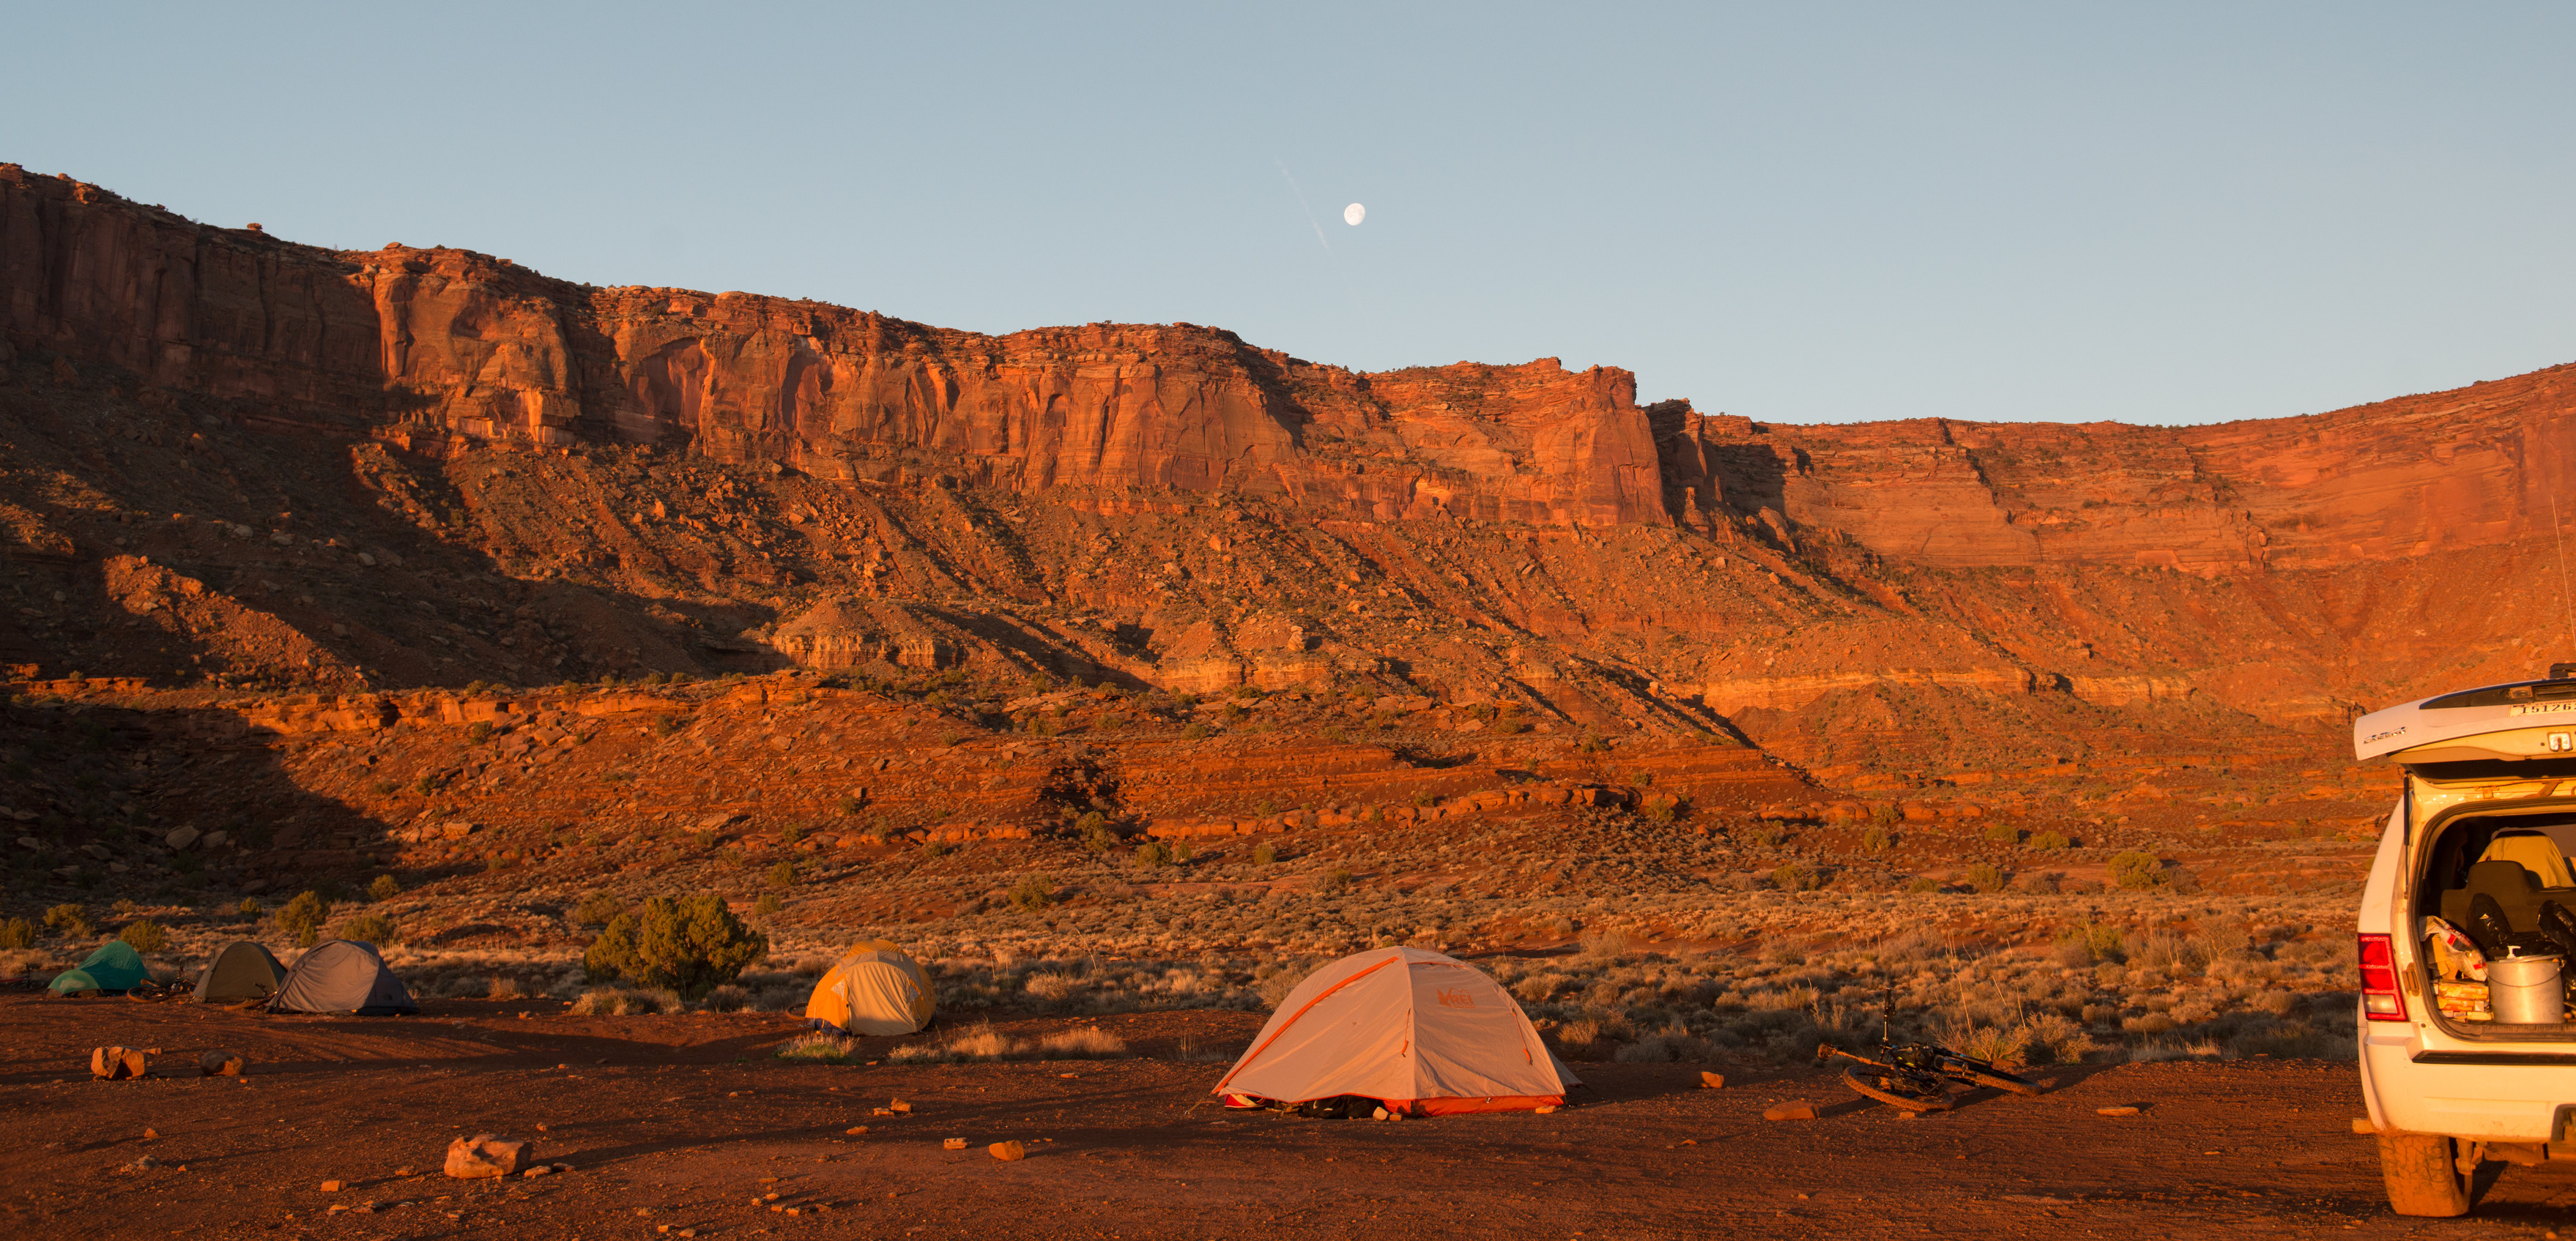 tents scattered around a flat area with tall orange cliffs and the moon in the distance